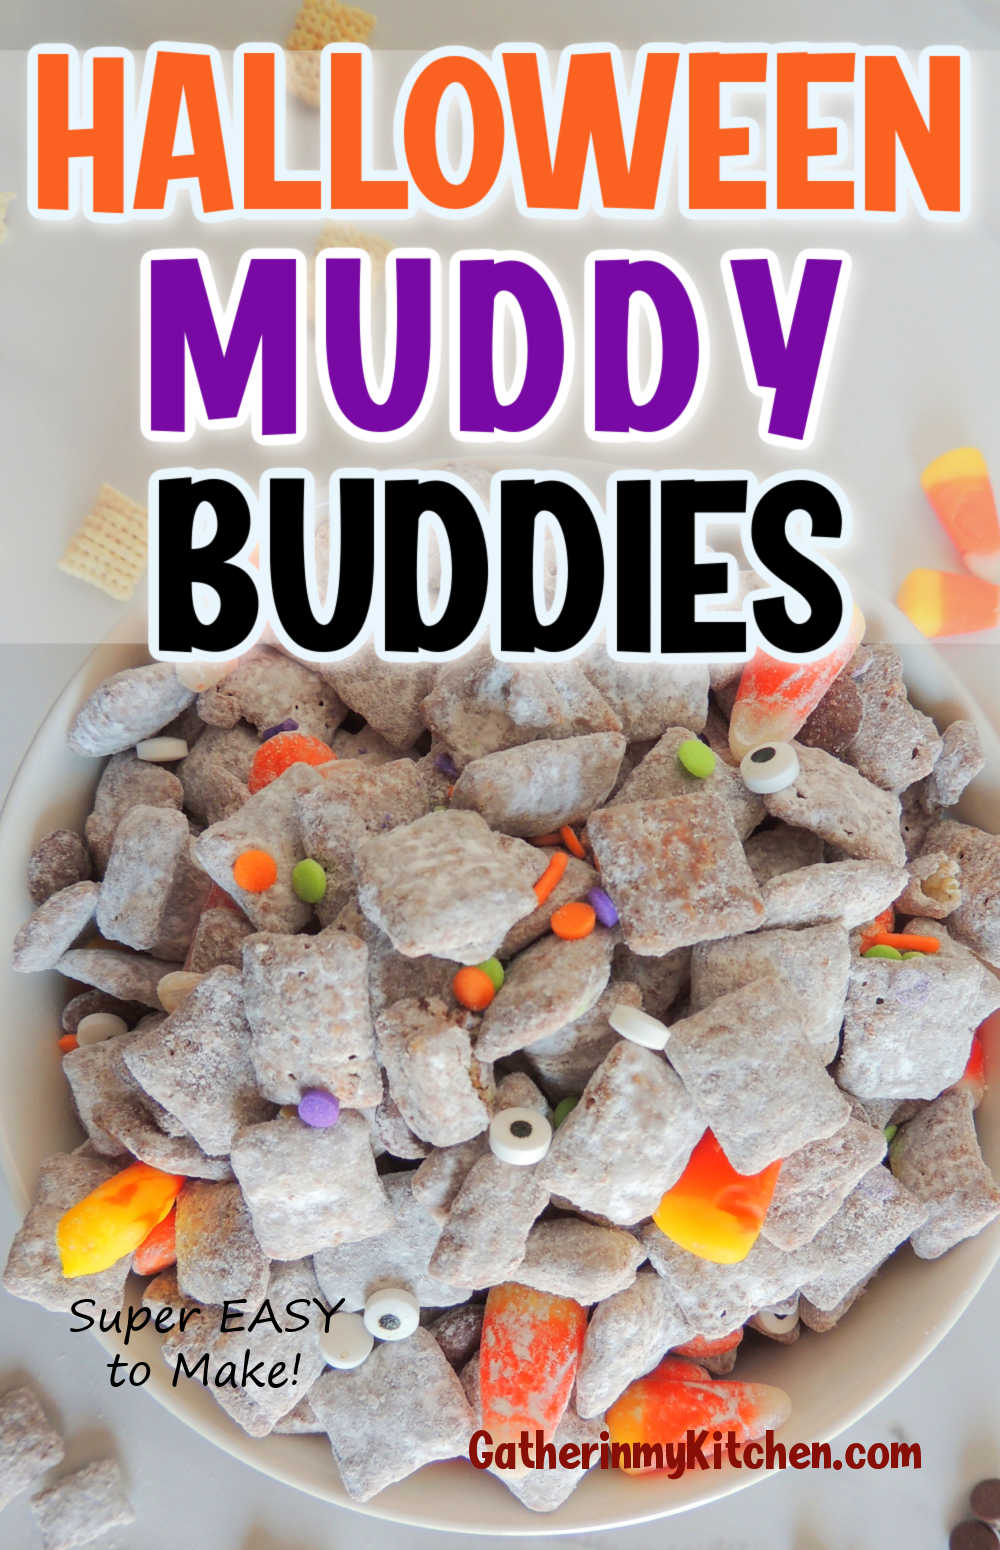 Pin image: top says "Halloween Muddy Buddies" with a pic of a bowl of muddy buddies.